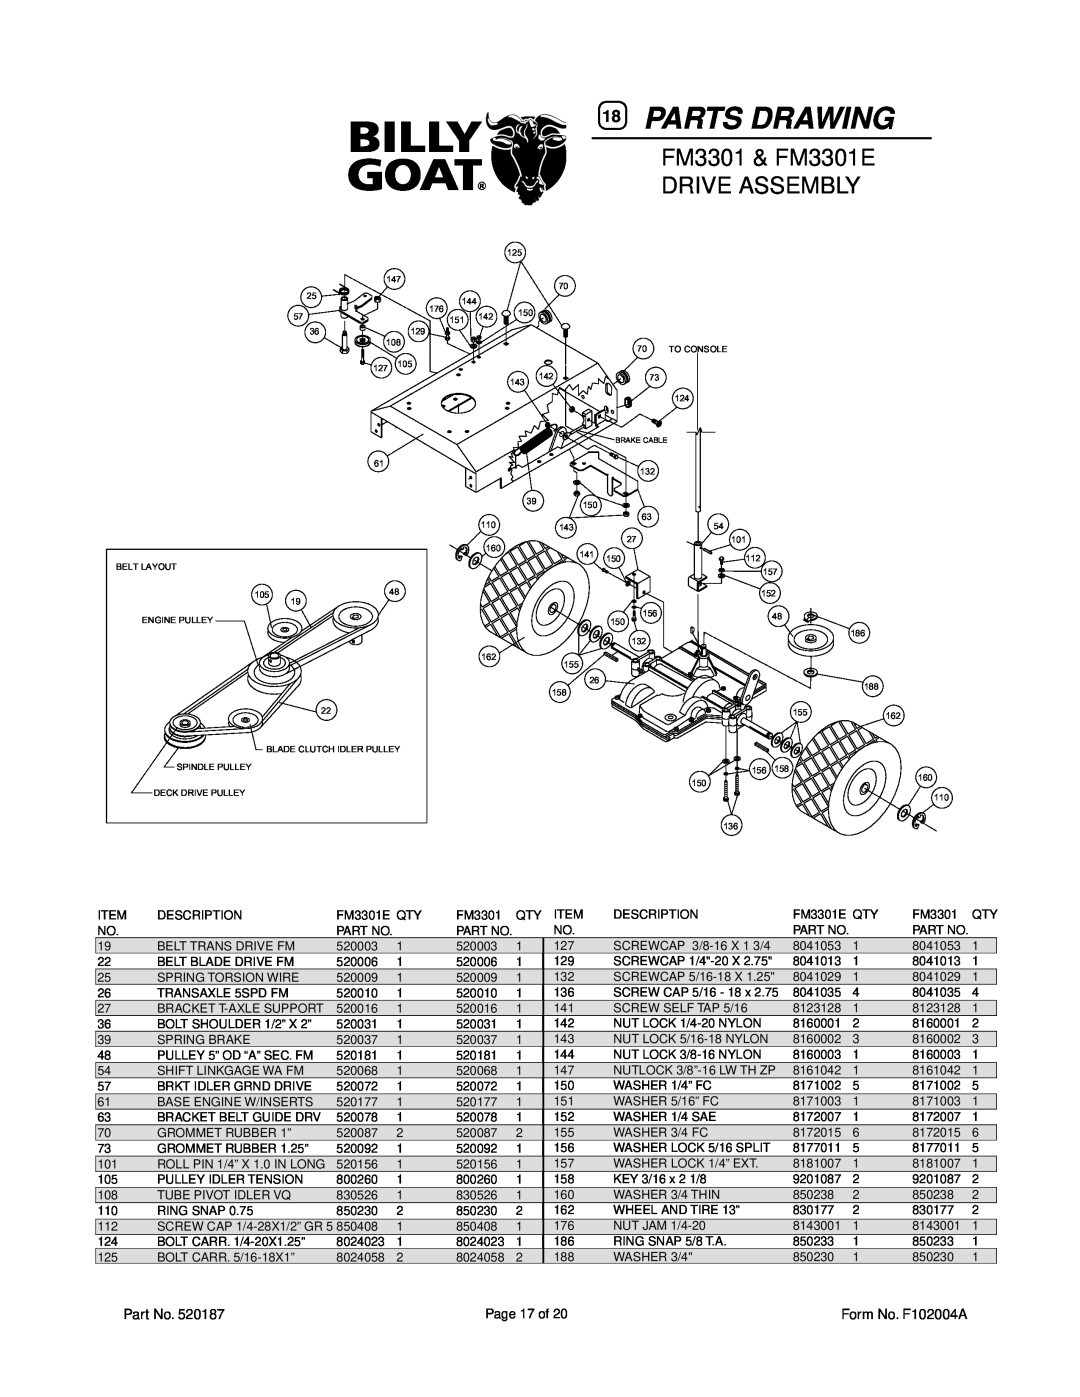 Billy Goat owner manual Drive Assembly, Parts Drawing, FM3301 & FM3301E 